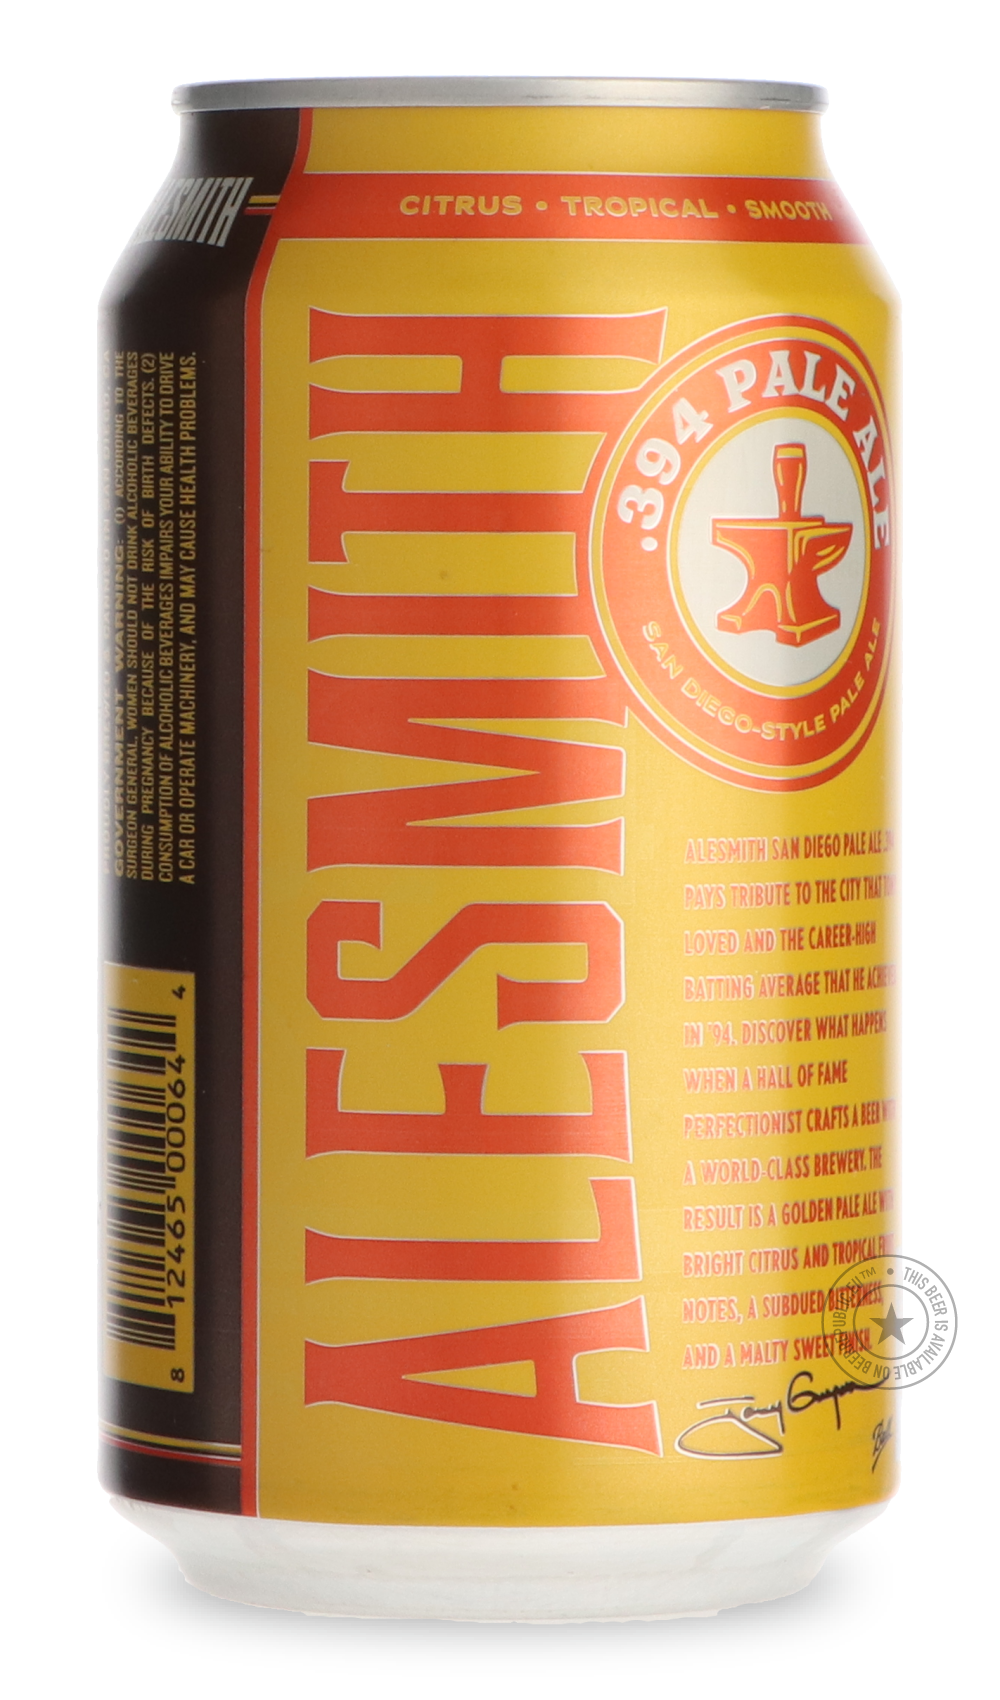 -AleSmith- .394 Pale Ale-Pale- Only @ Beer Republic - The best online beer store for American & Canadian craft beer - Buy beer online from the USA and Canada - Bier online kopen - Amerikaans bier kopen - Craft beer store - Craft beer kopen - Amerikanisch bier kaufen - Bier online kaufen - Acheter biere online - IPA - Stout - Porter - New England IPA - Hazy IPA - Imperial Stout - Barrel Aged - Barrel Aged Imperial Stout - Brown - Dark beer - Blond - Blonde - Pilsner - Lager - Wheat - Weizen - Amber - Barley 